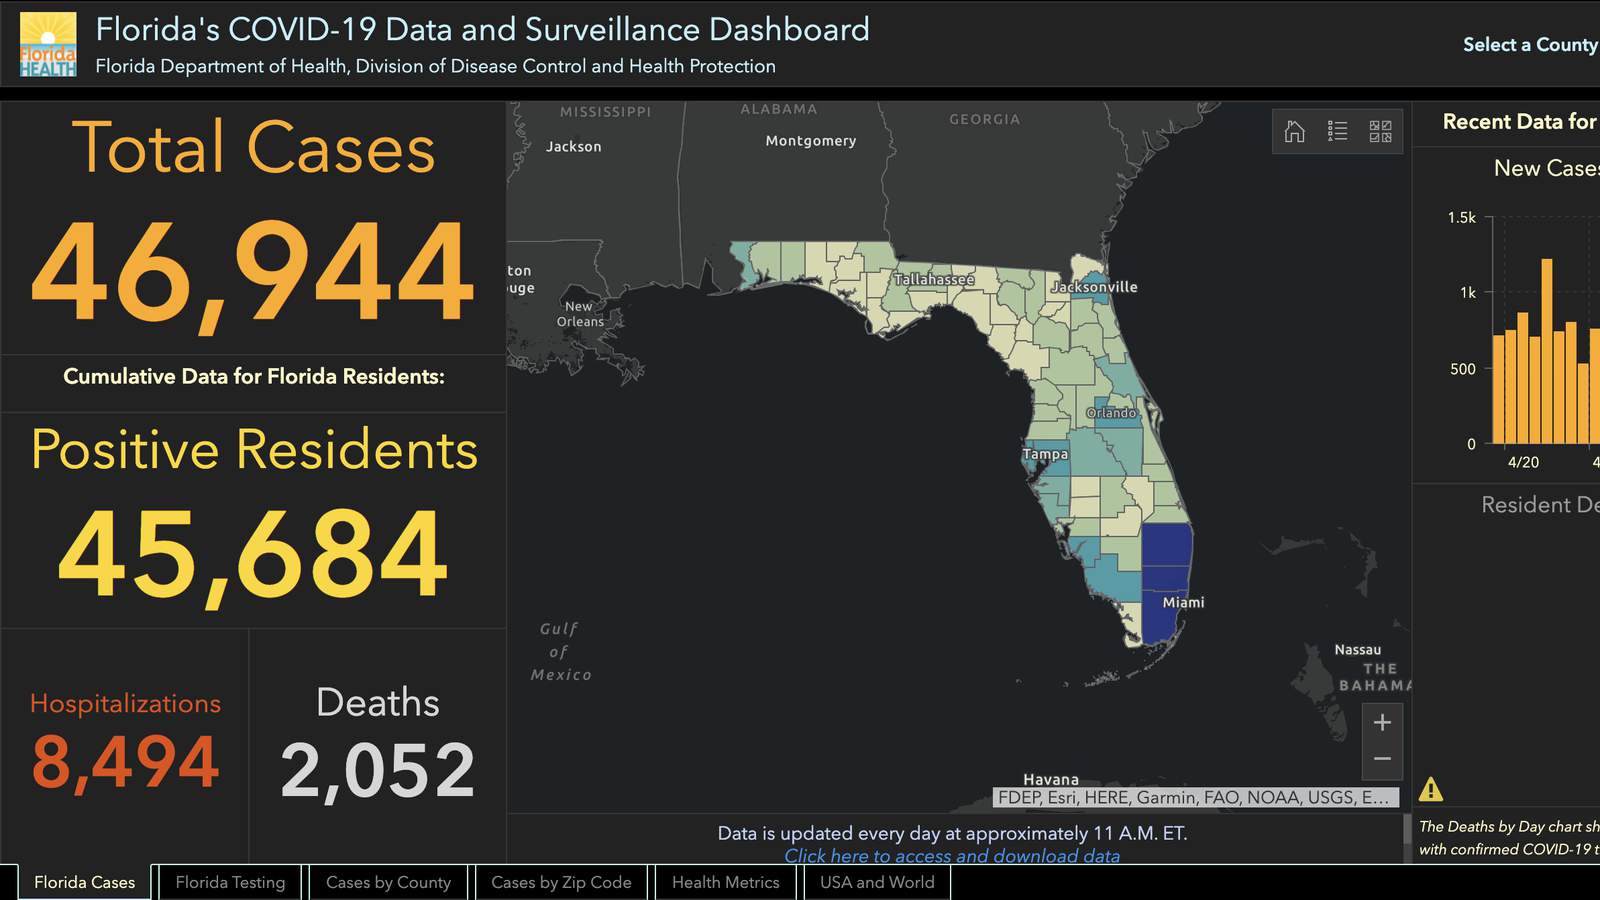 Firing of Florida’s coronavirus data manager raises red flags about transparency